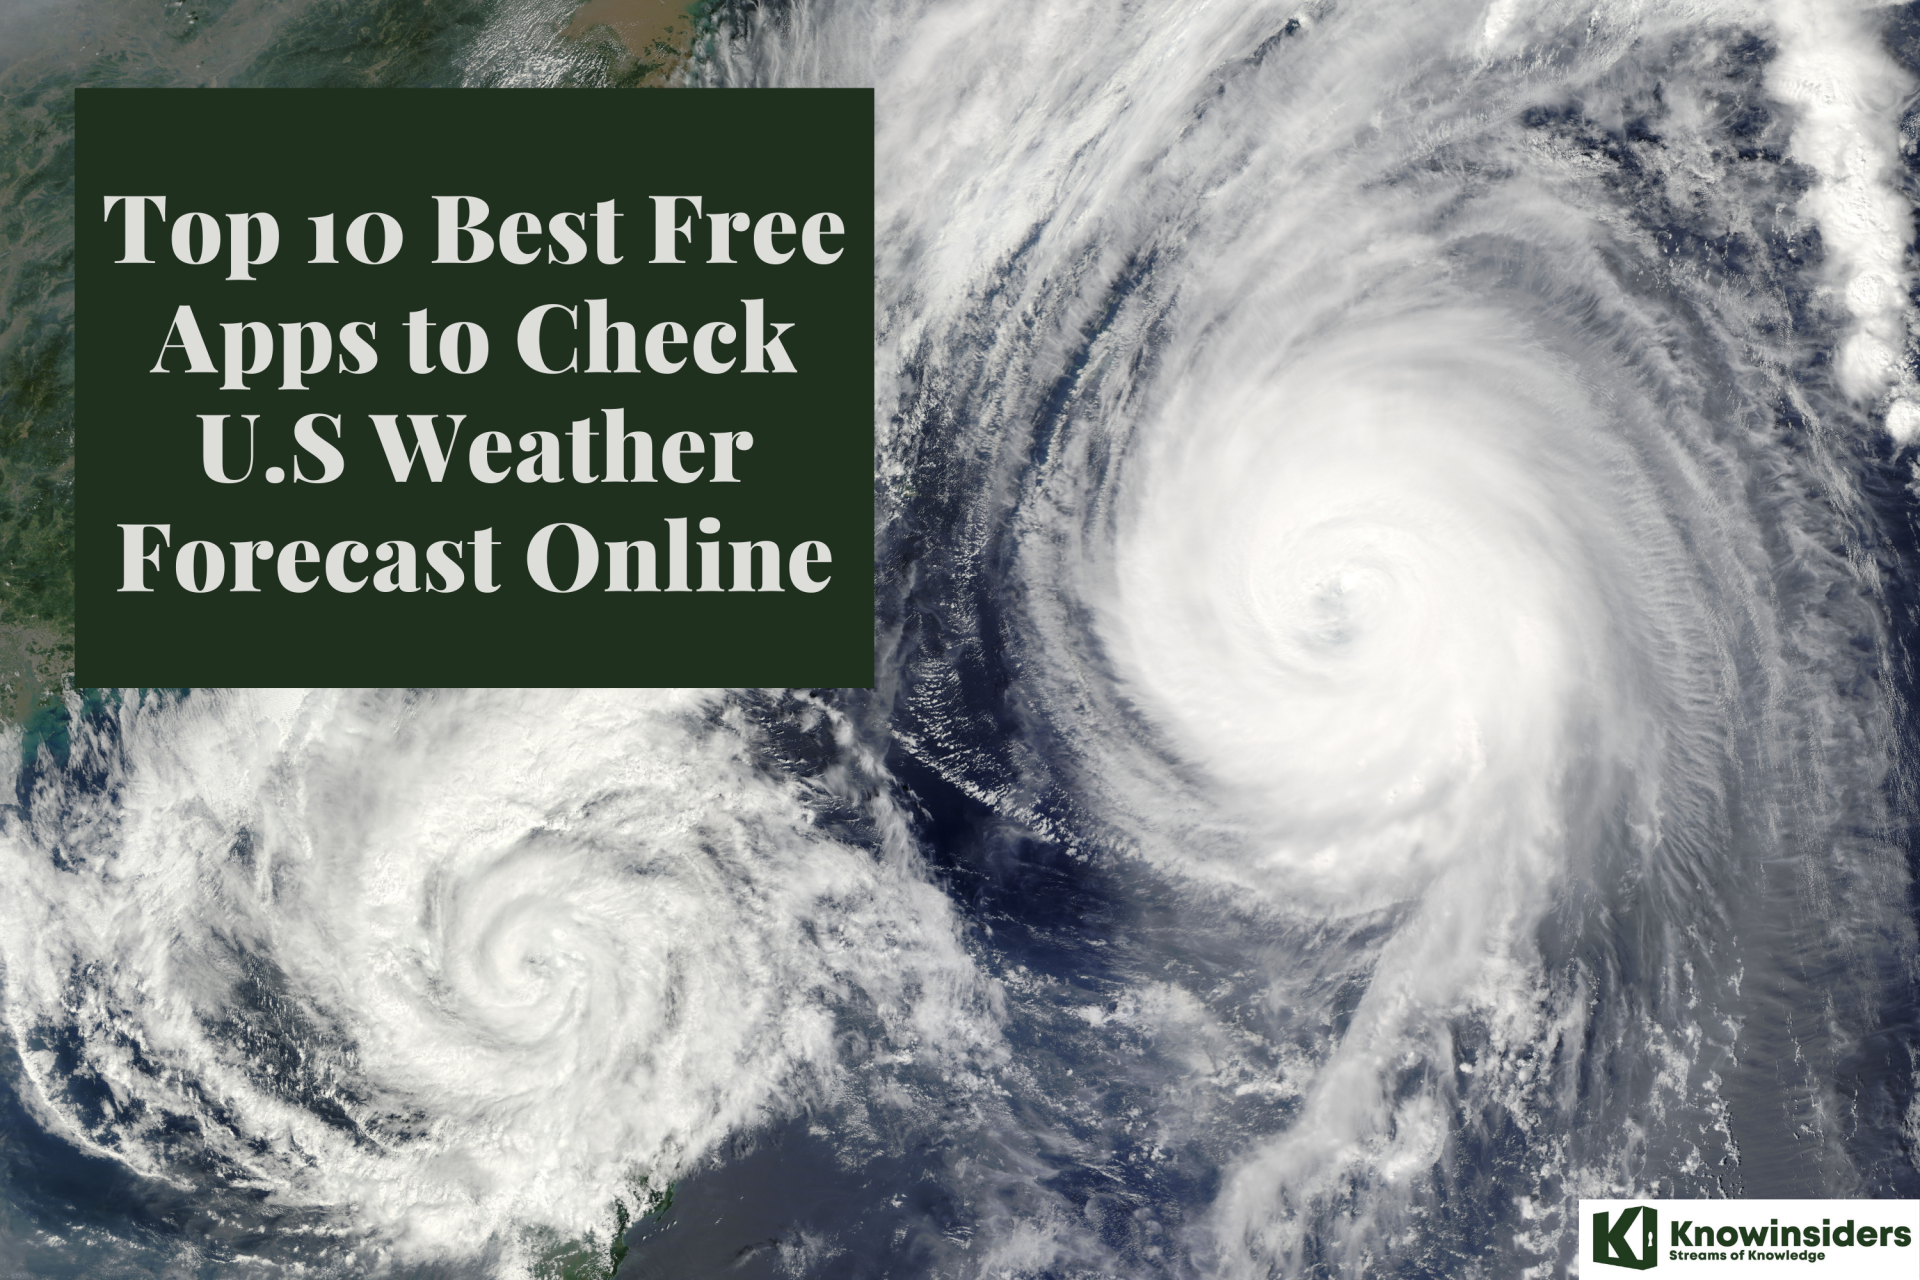 Top 10 Best Free Apps to Check U.S Weather Forecast Online